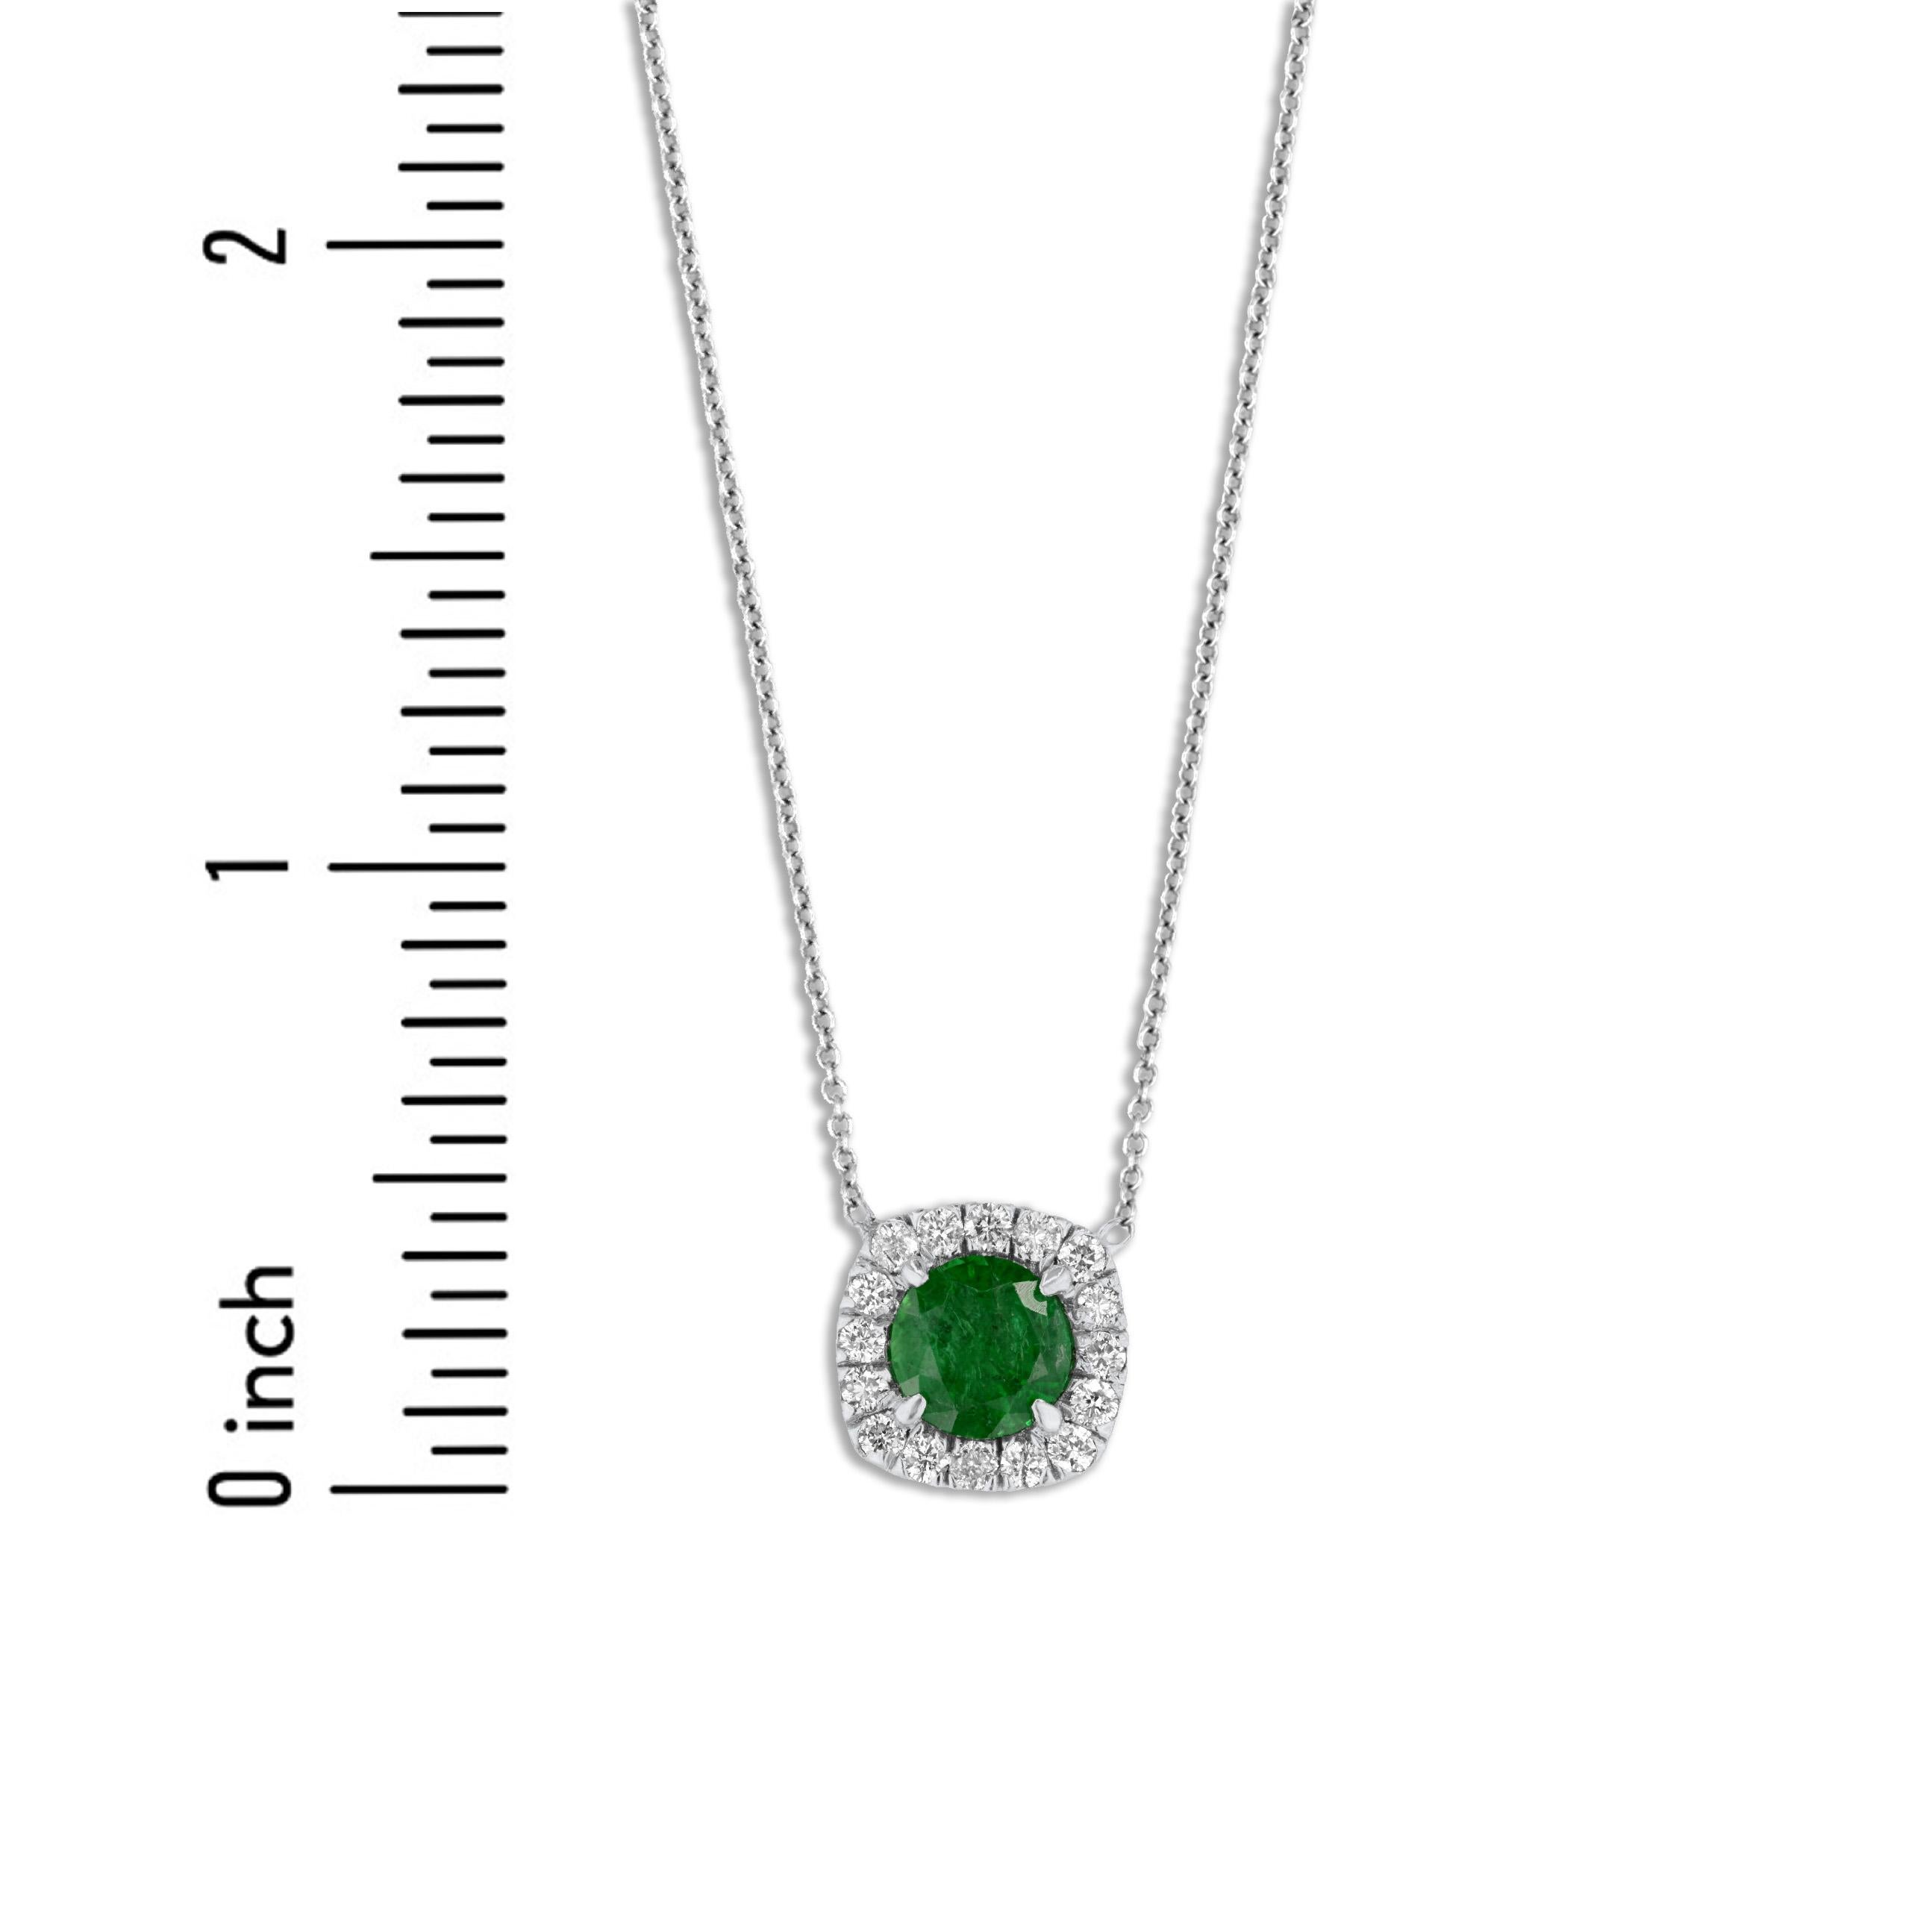 Contemporary 0.76 Carat Round Emerald Pendant with 0.24 Carat Diamond Halo in 14k ref2120 For Sale